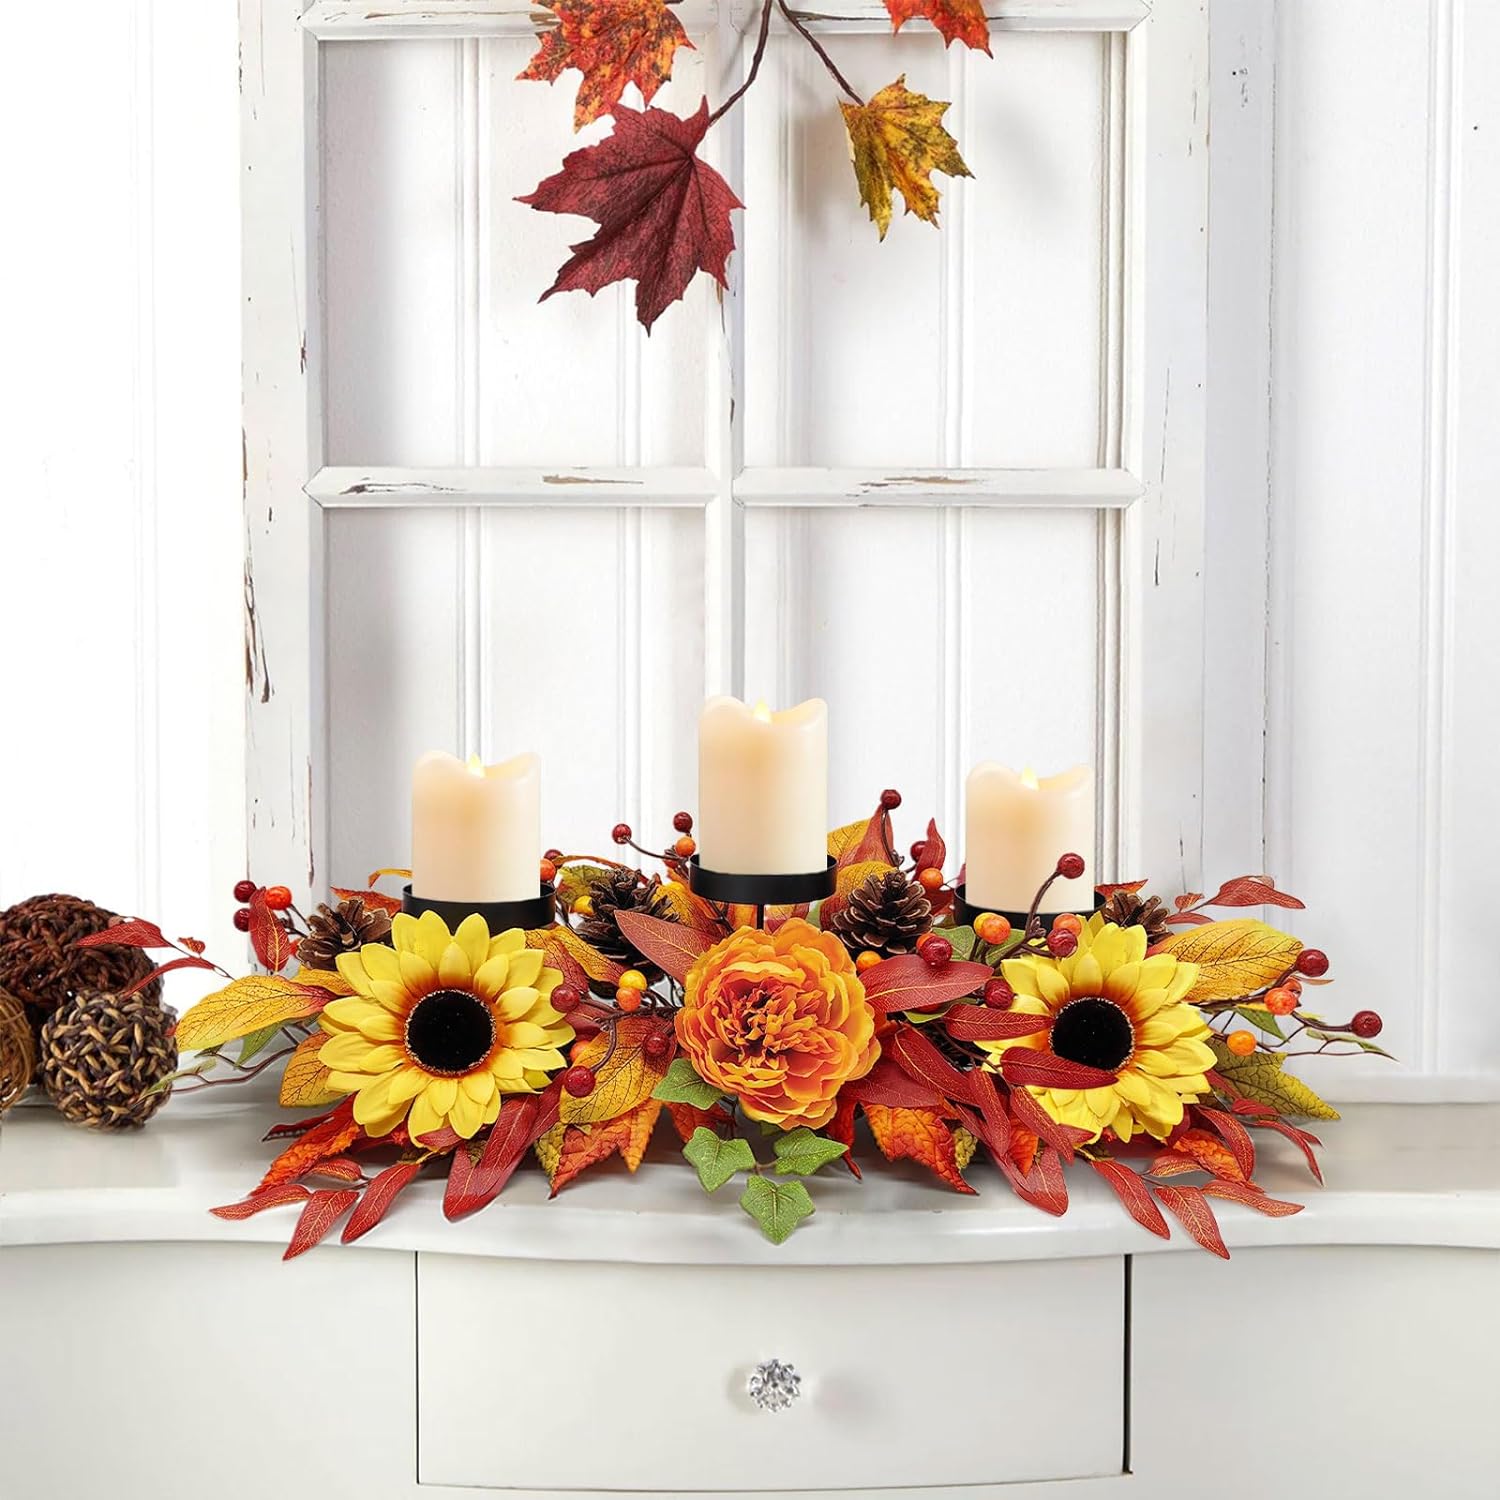 Fall Centerpiece Table Decorations, 27.5 L Assorted Artificial Sunflowers, Berries, Autumn Leaves and Pine Cones, Harvest Table Candle Holder for Dinning Table, Fireplace Mantel (Candle Not Include)